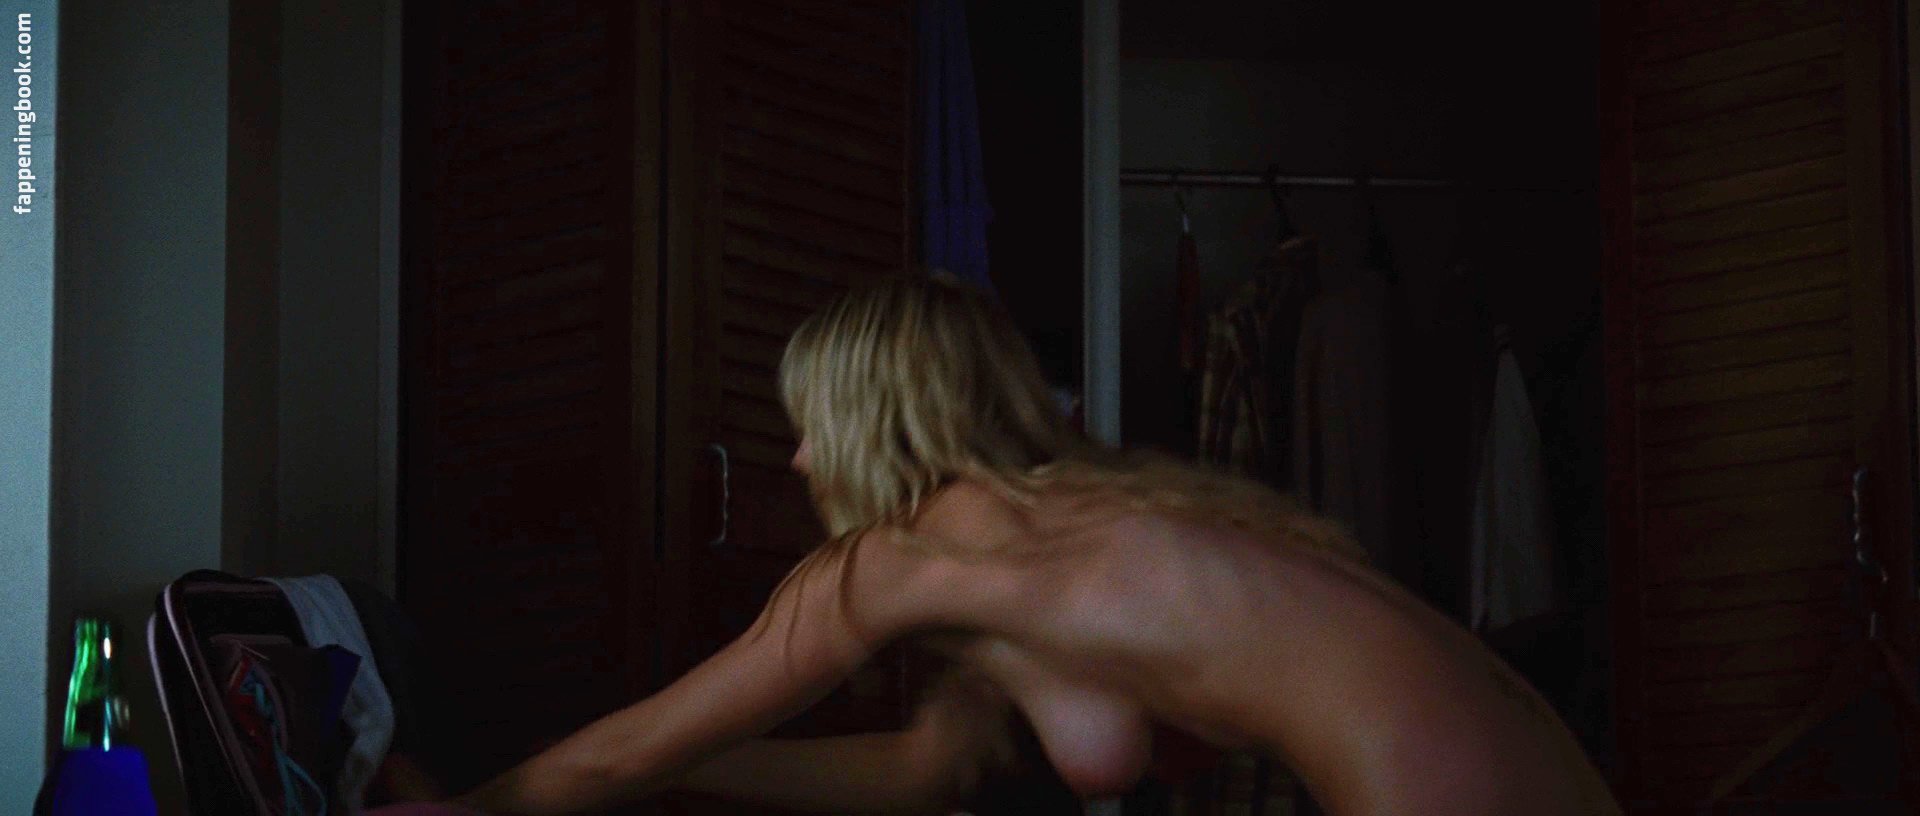 Page 1 of 2. Laura Ramsey Nude Photos. 